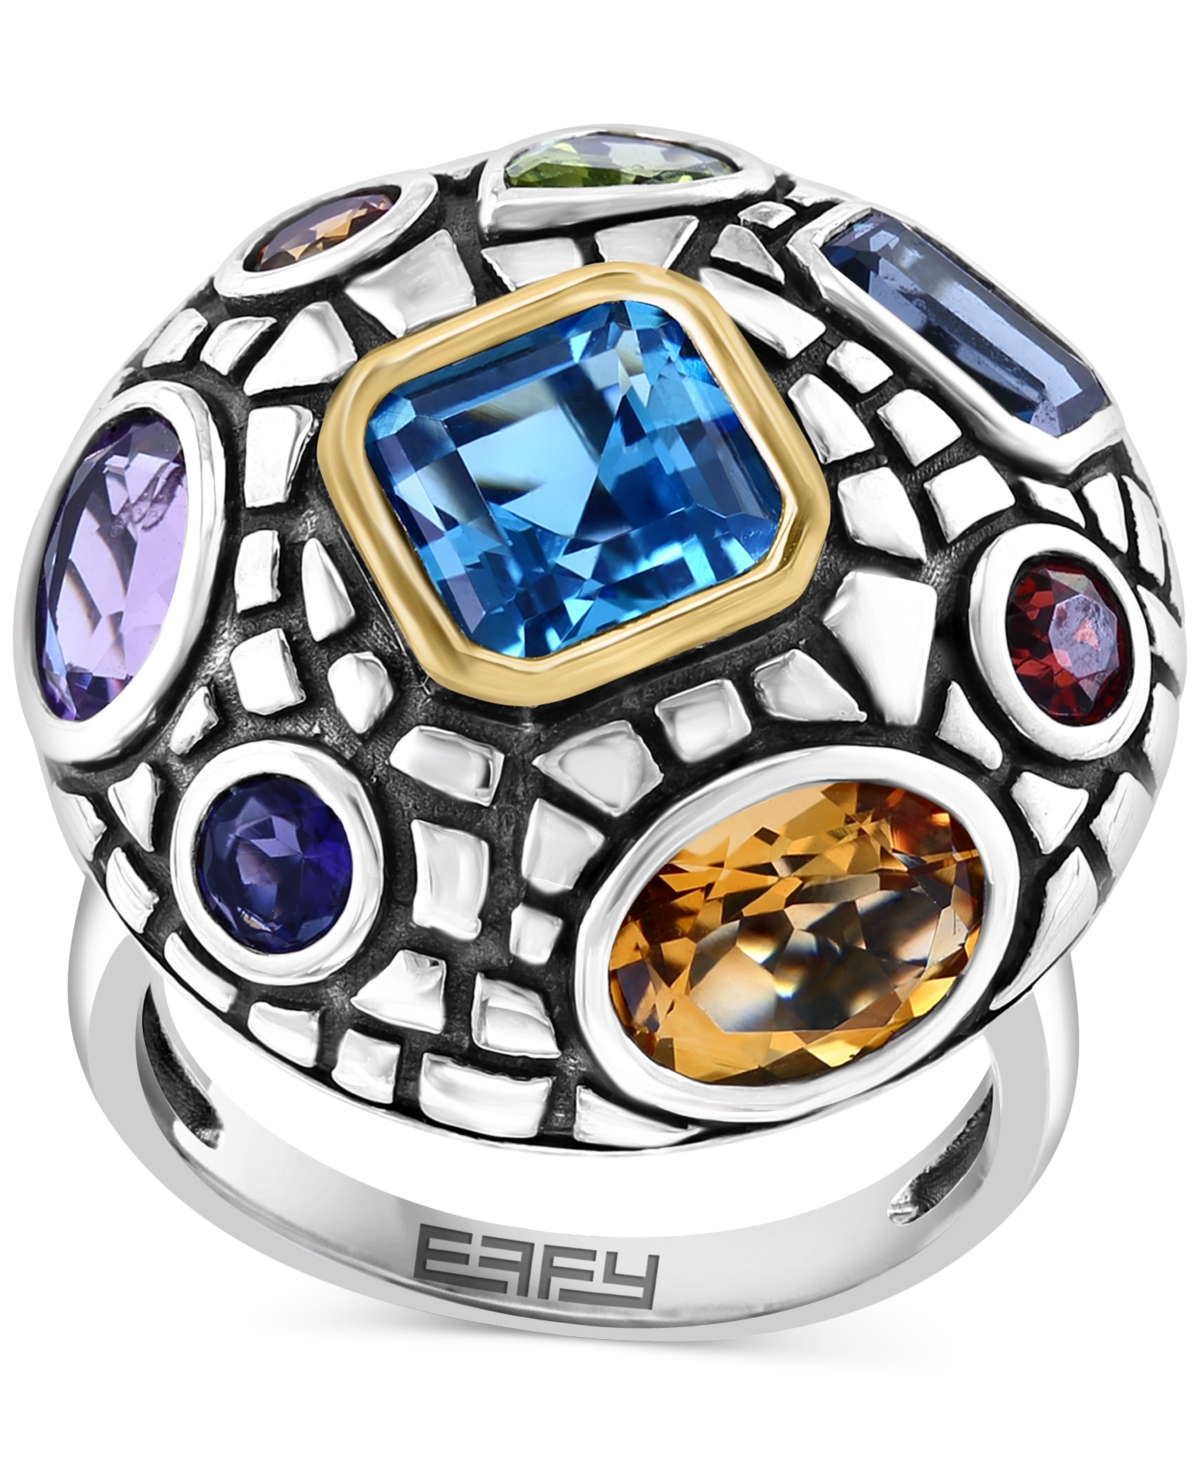 Effy Collection Effy Multi-gemstone Statement Ring (6 Ct. T.w.) In Sterling Silver & 18k Gold-plate In K Gold Over Silver